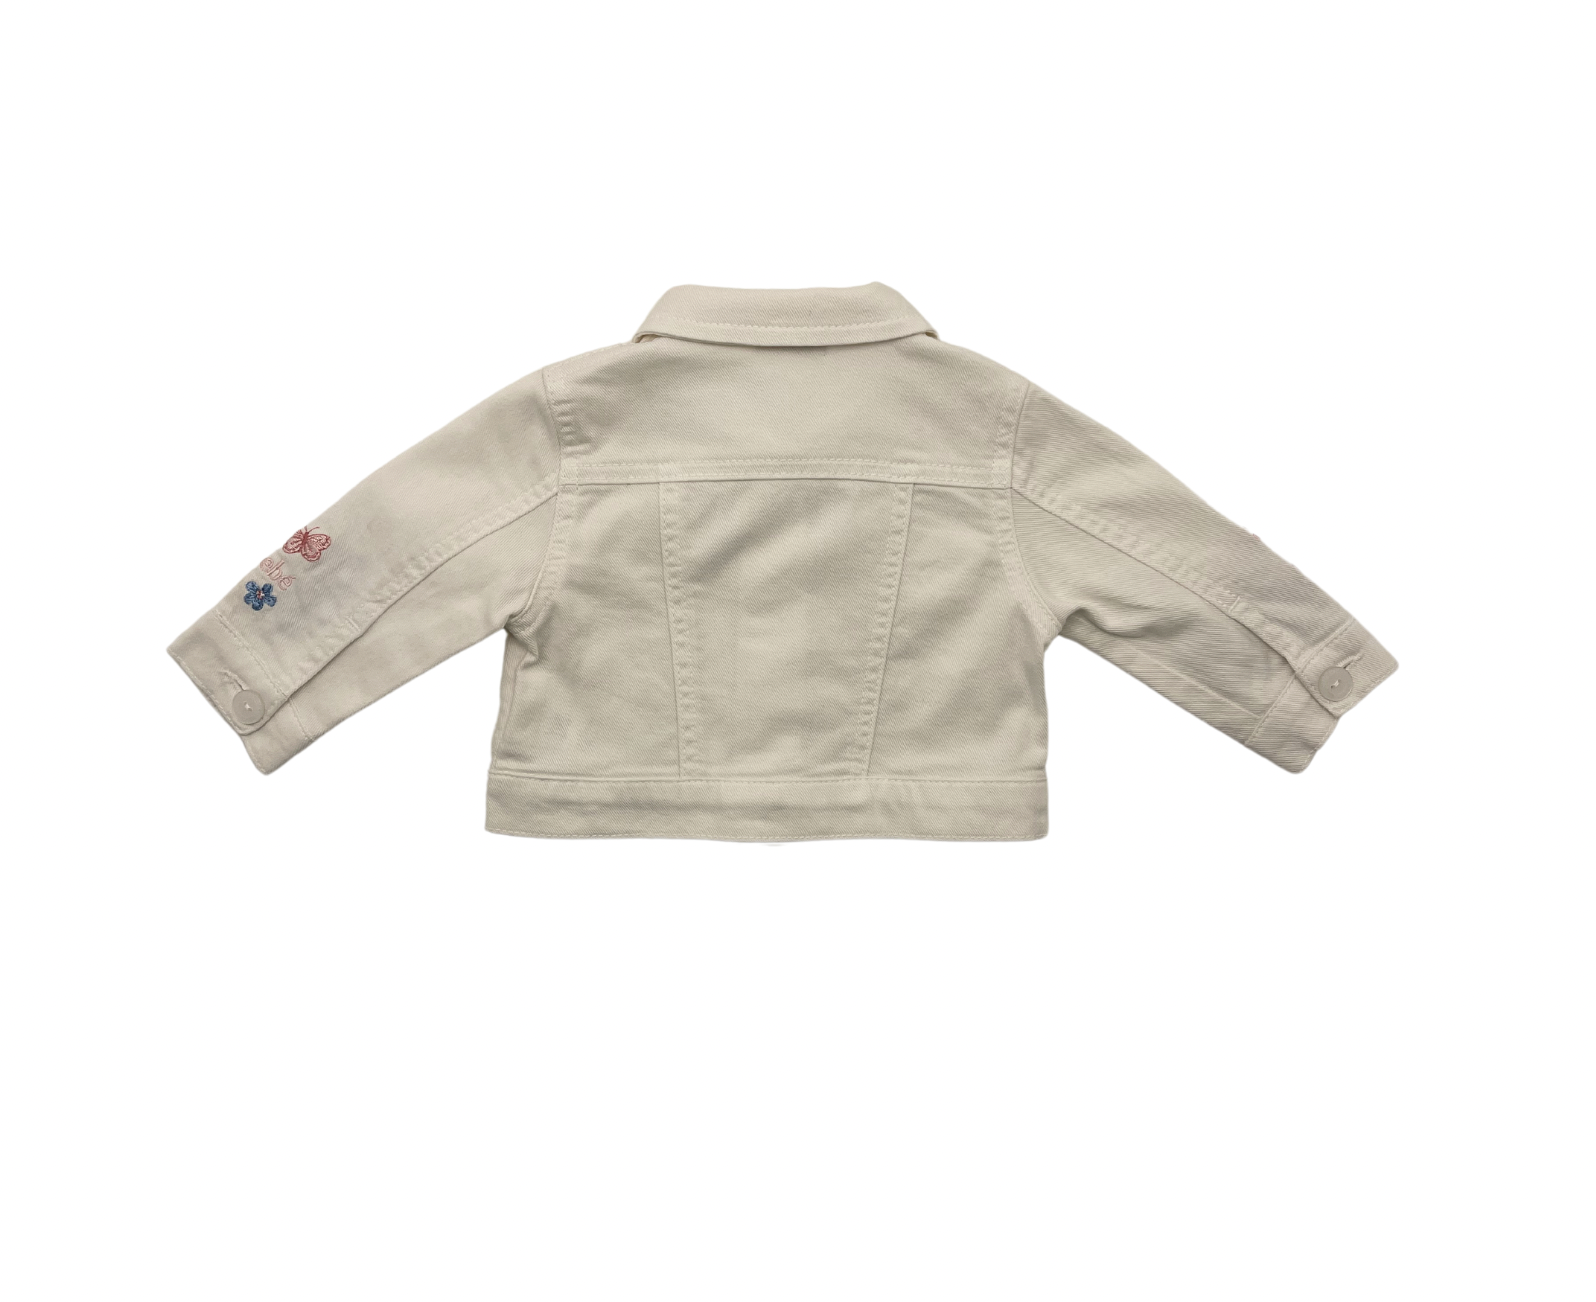 LE BABE - White denim jacket with flower embroidery - 6 months